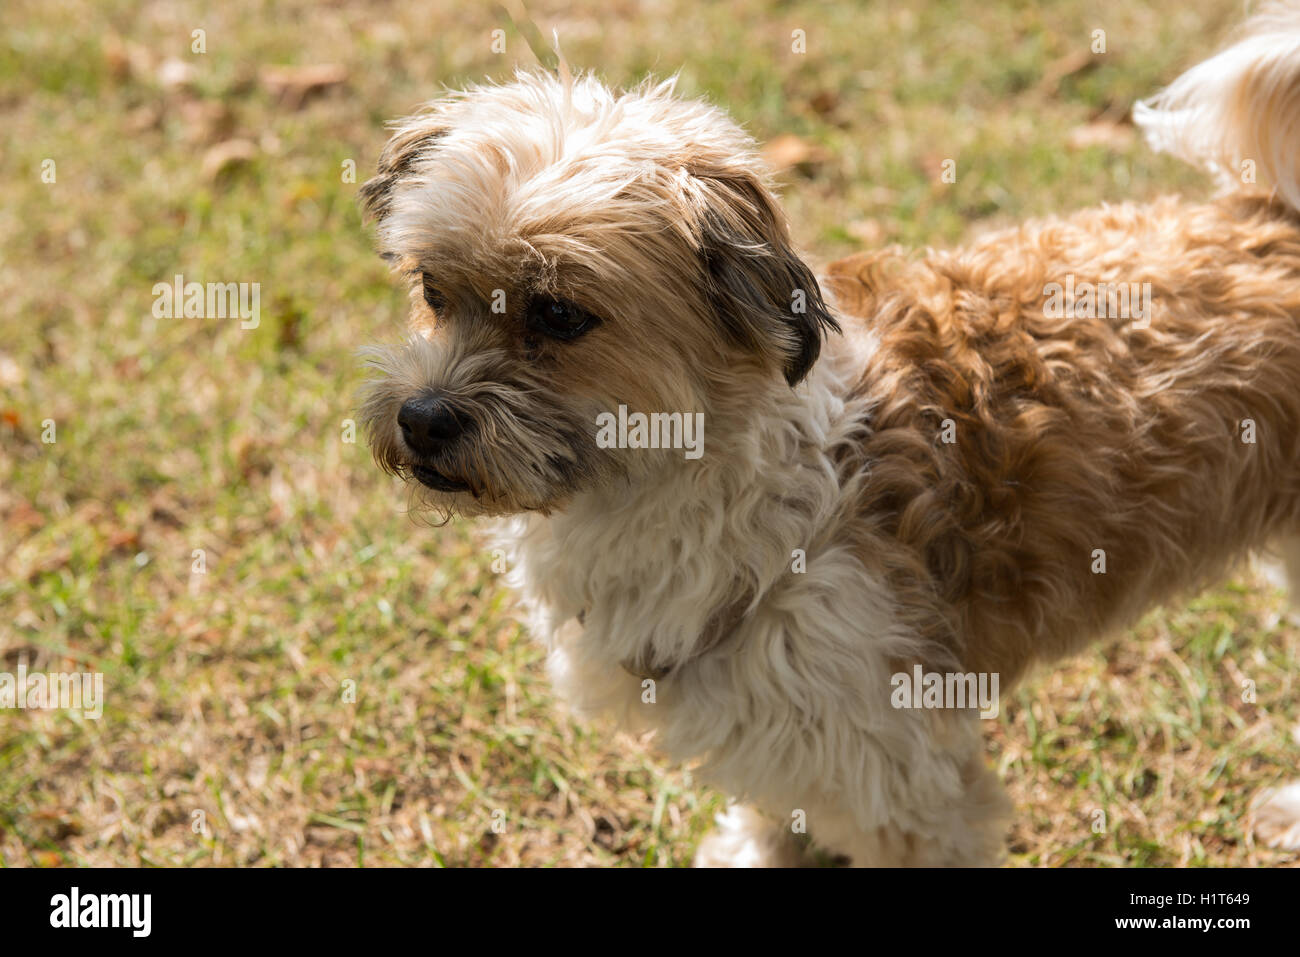 small dog standing on grass and looking concentrated Stock Photo